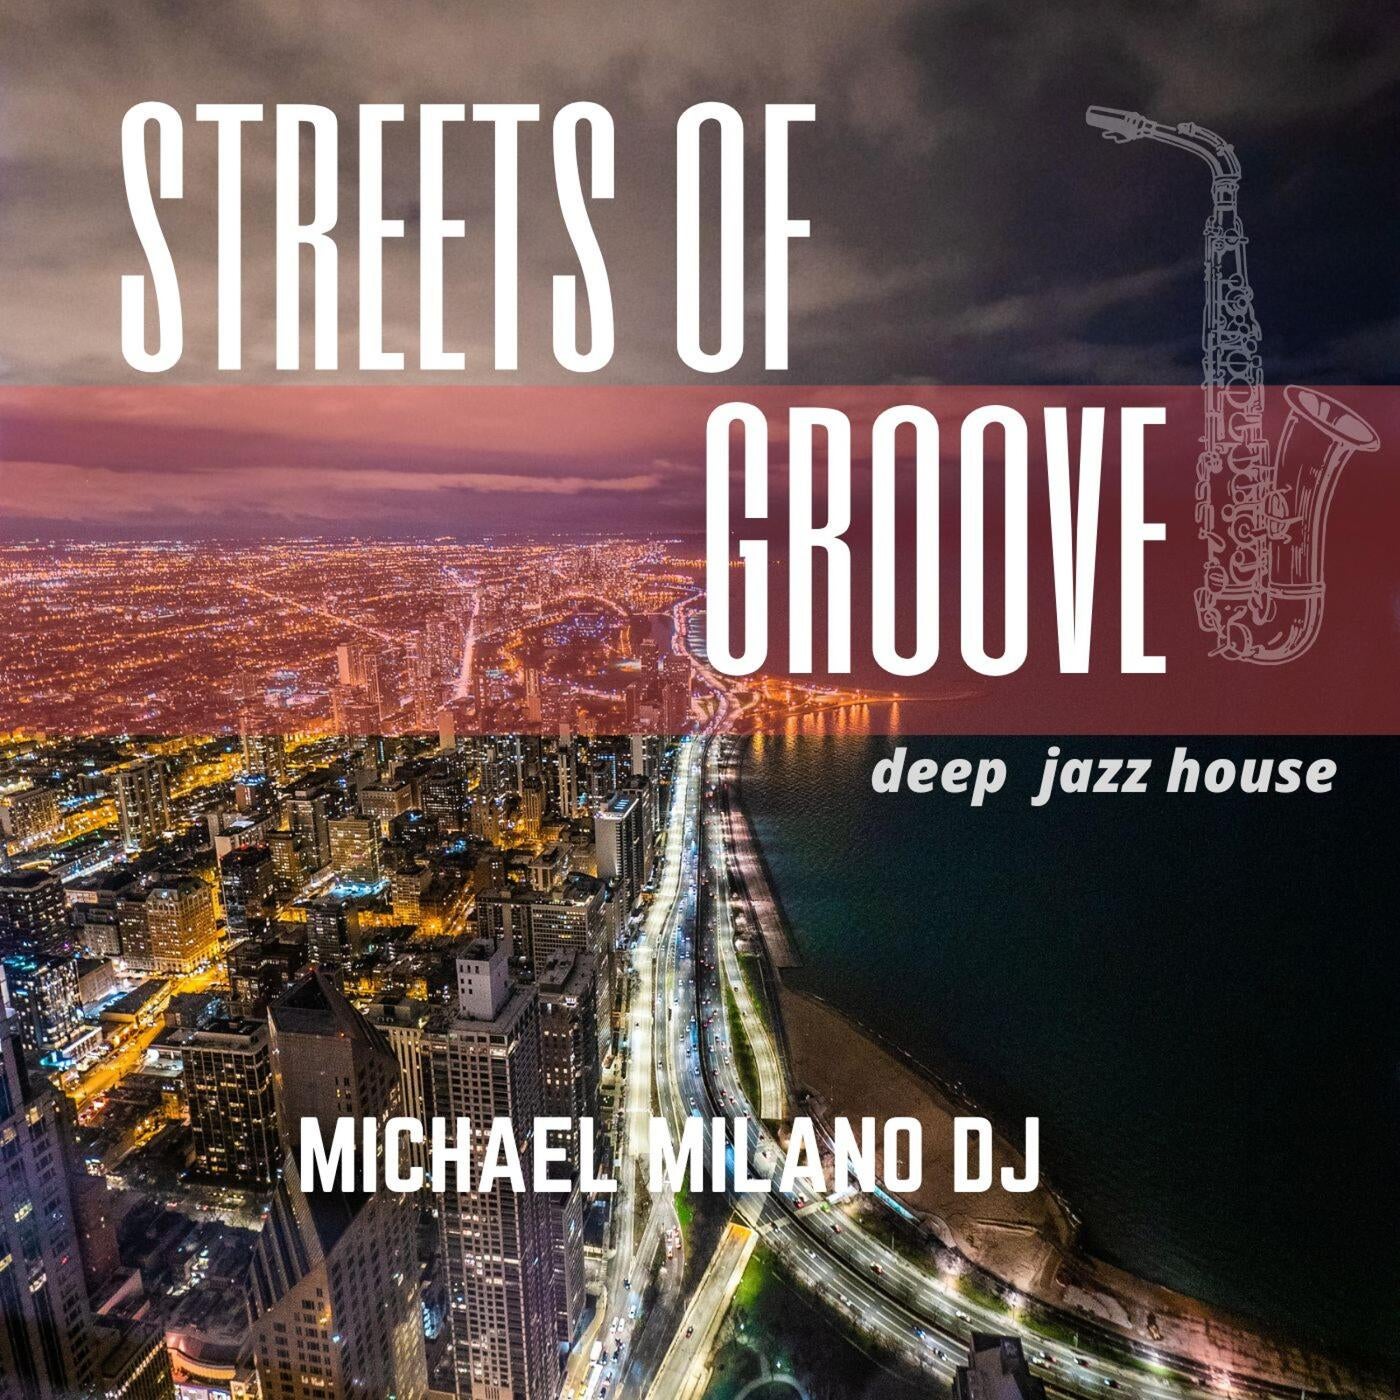 Streets of Groove